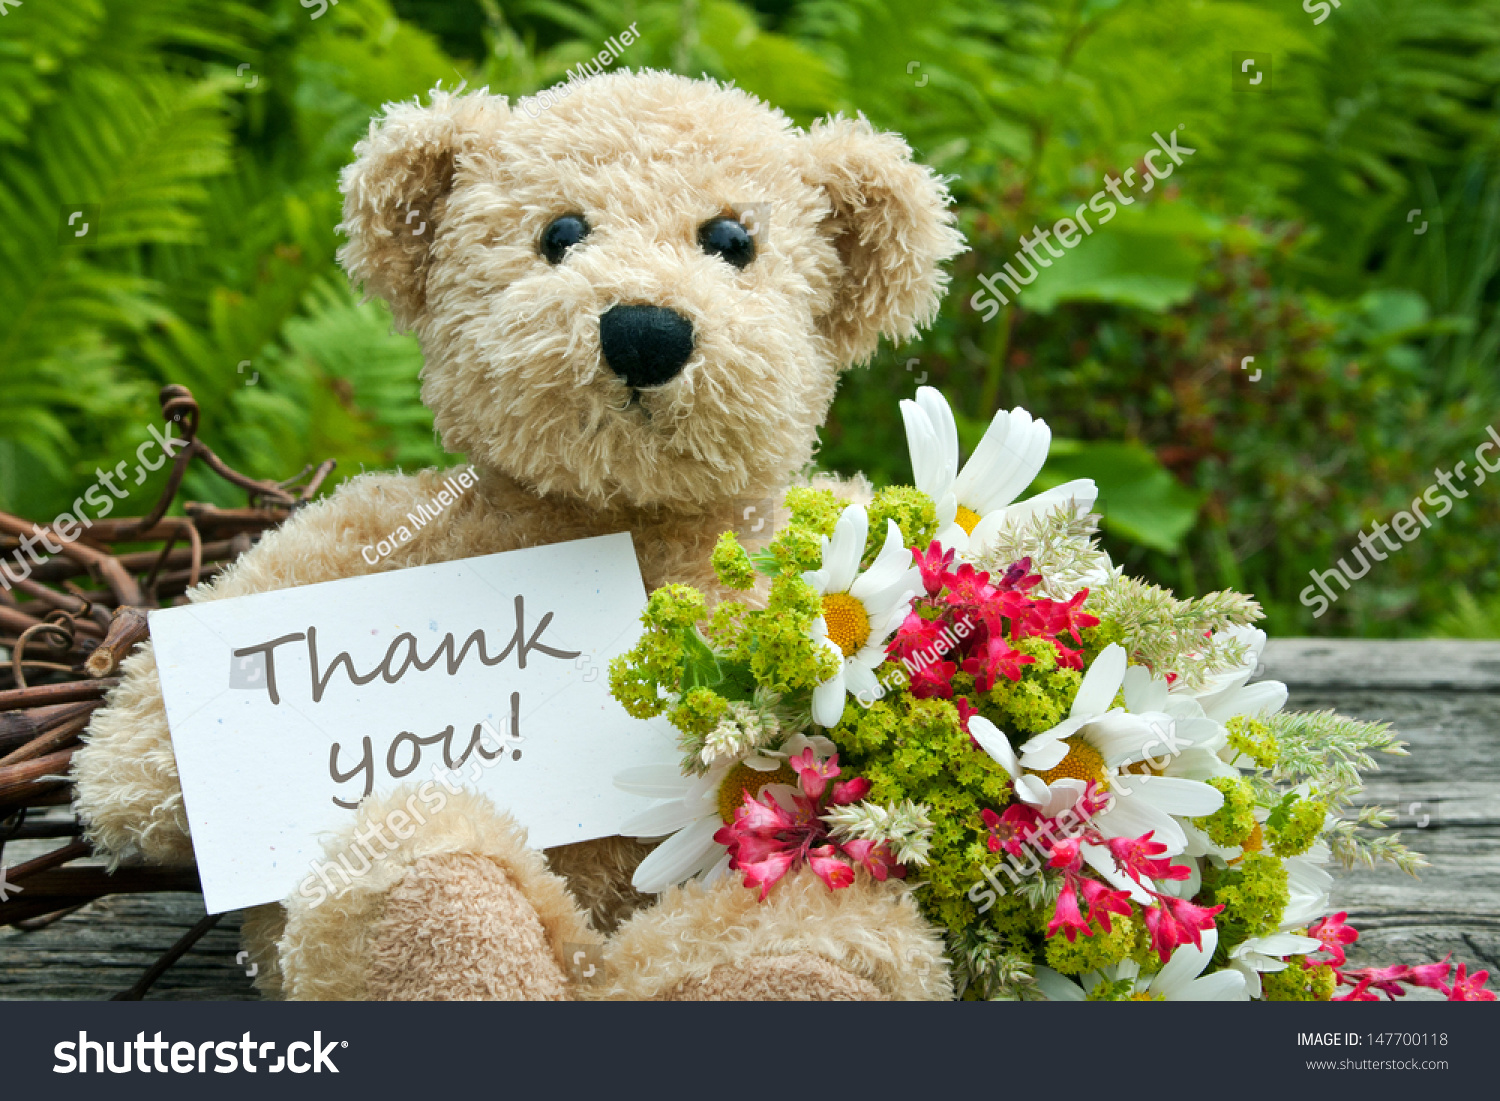 stock-photo-teddy-bear-with-flowers-and-card-with-lettering-thank-you-thank-you-teddy-147700118.jpg